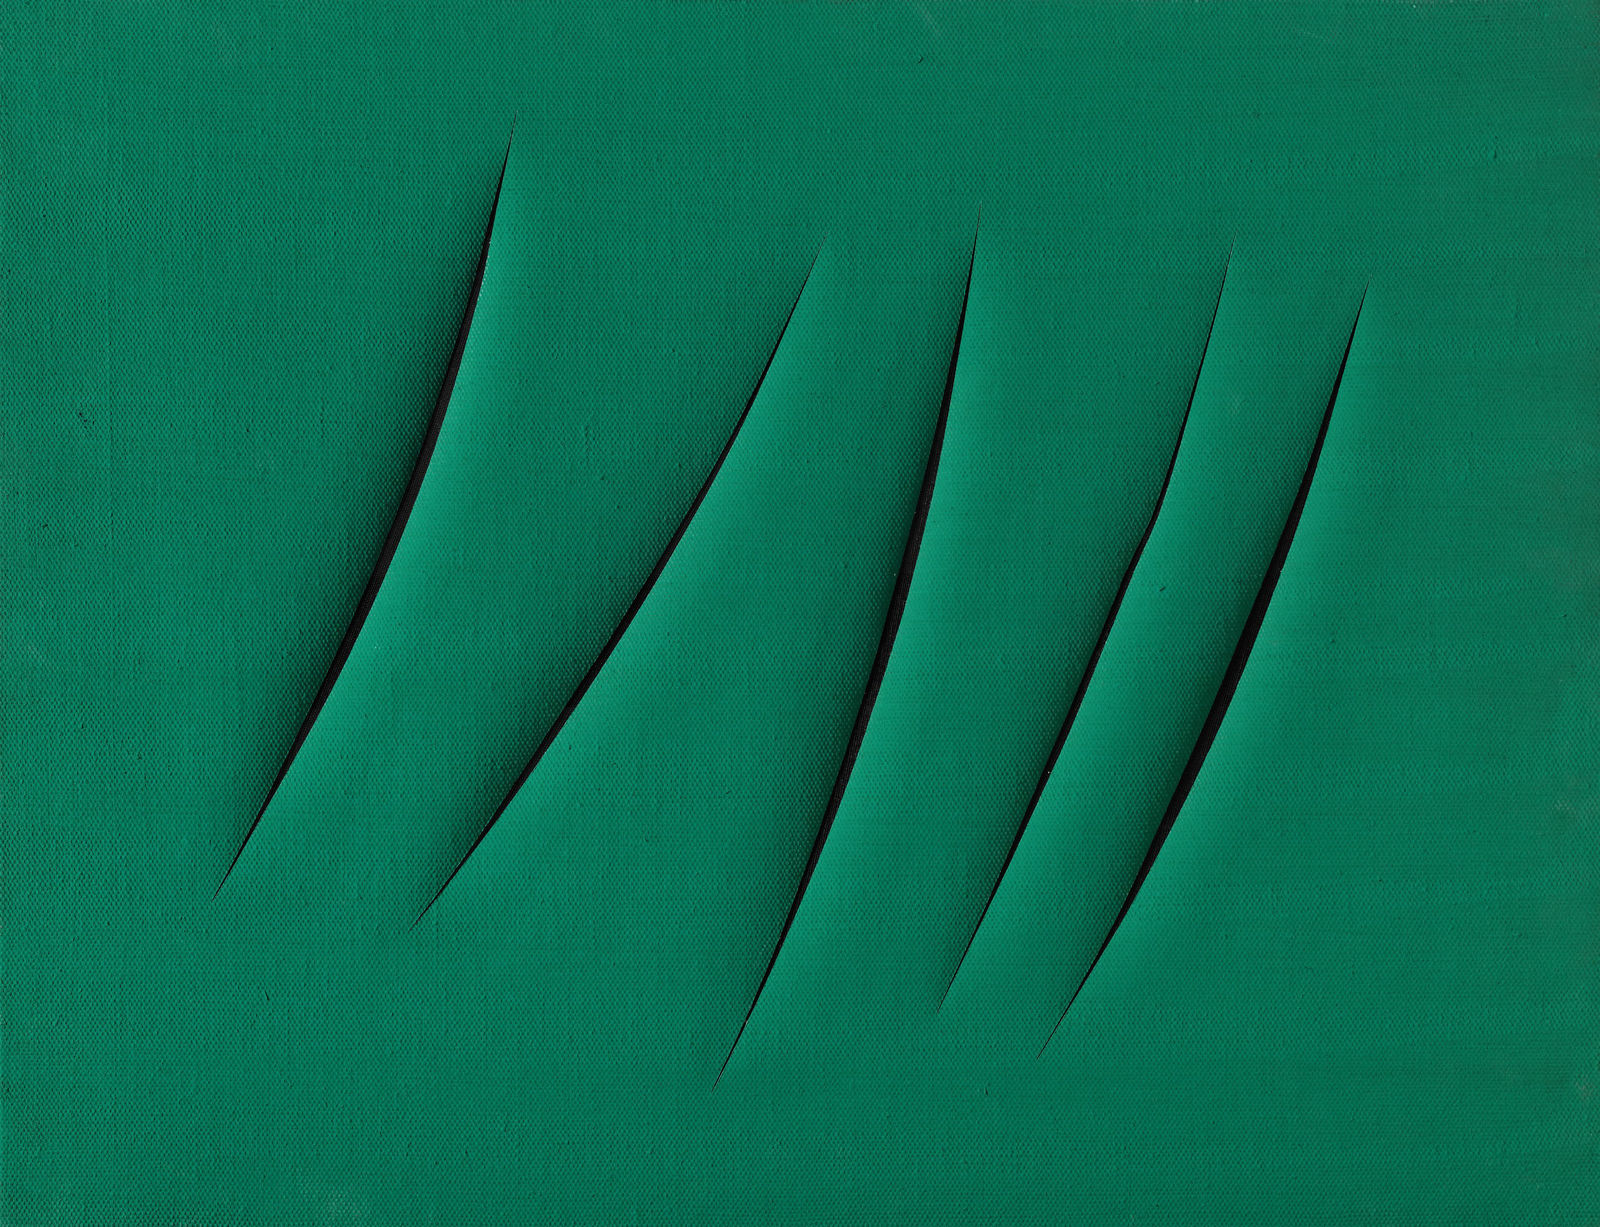 Lucio Fontana. Concetto spaziale, Attese. 1961. Waterpaint on canvas